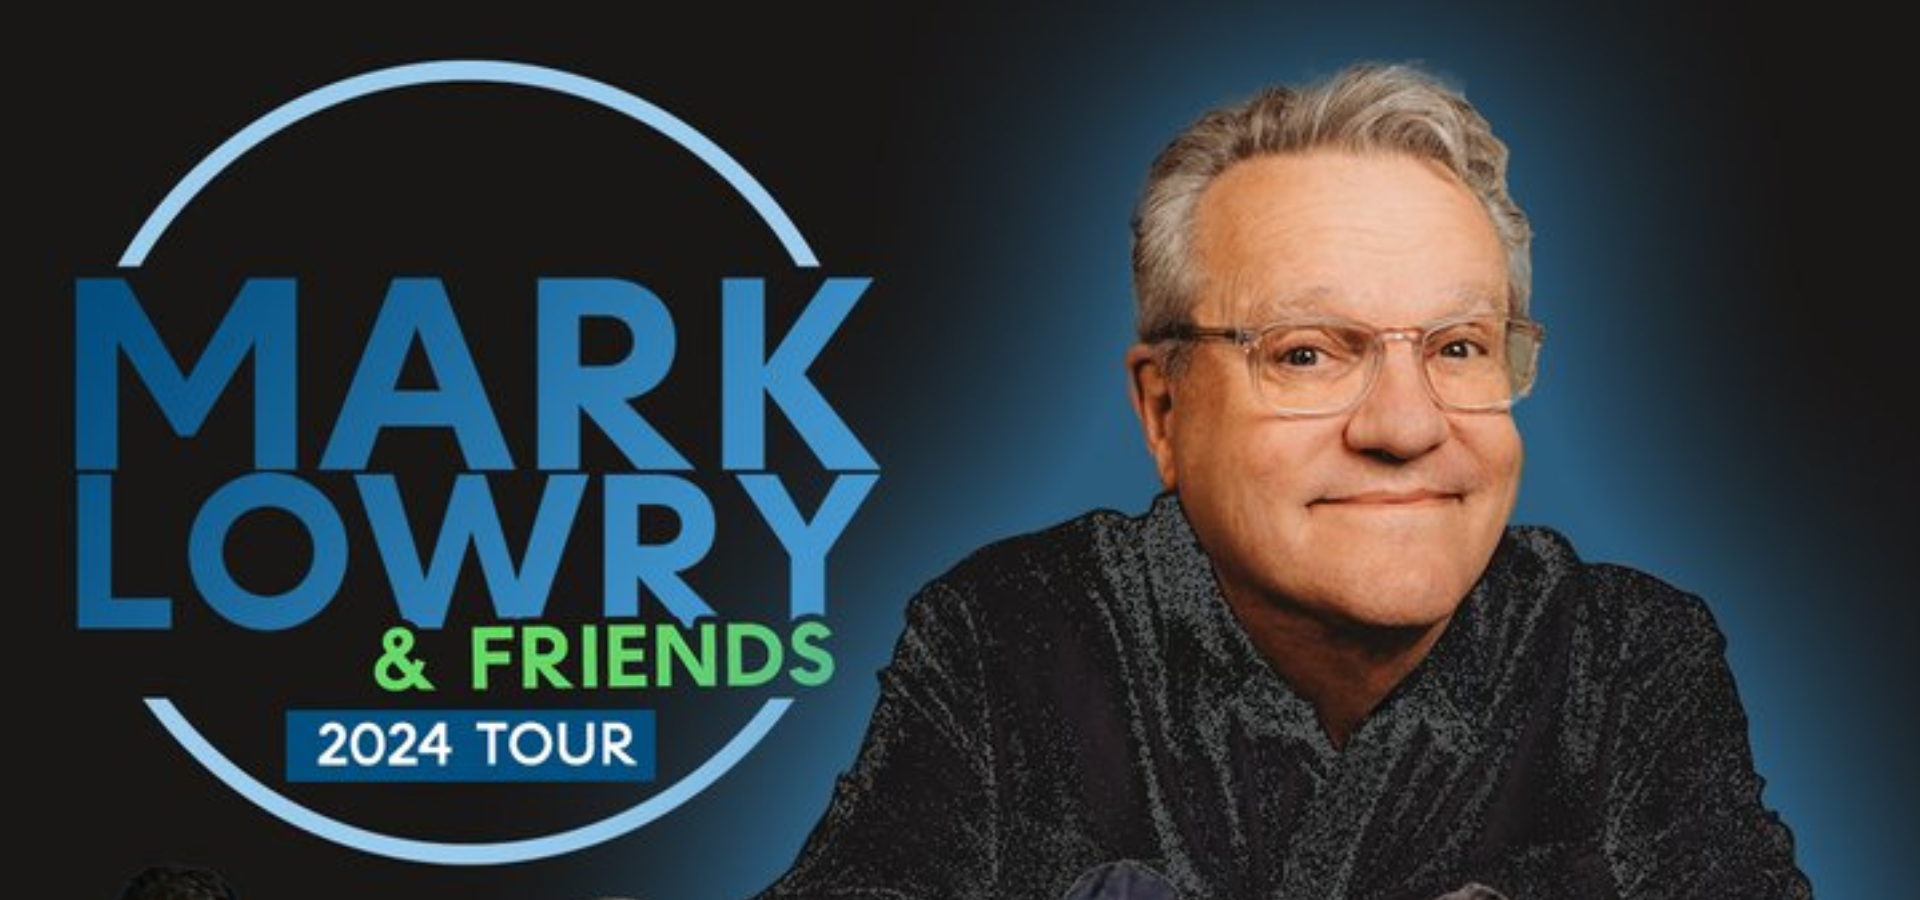 New Dates For Mark Lowry & Friends Tour